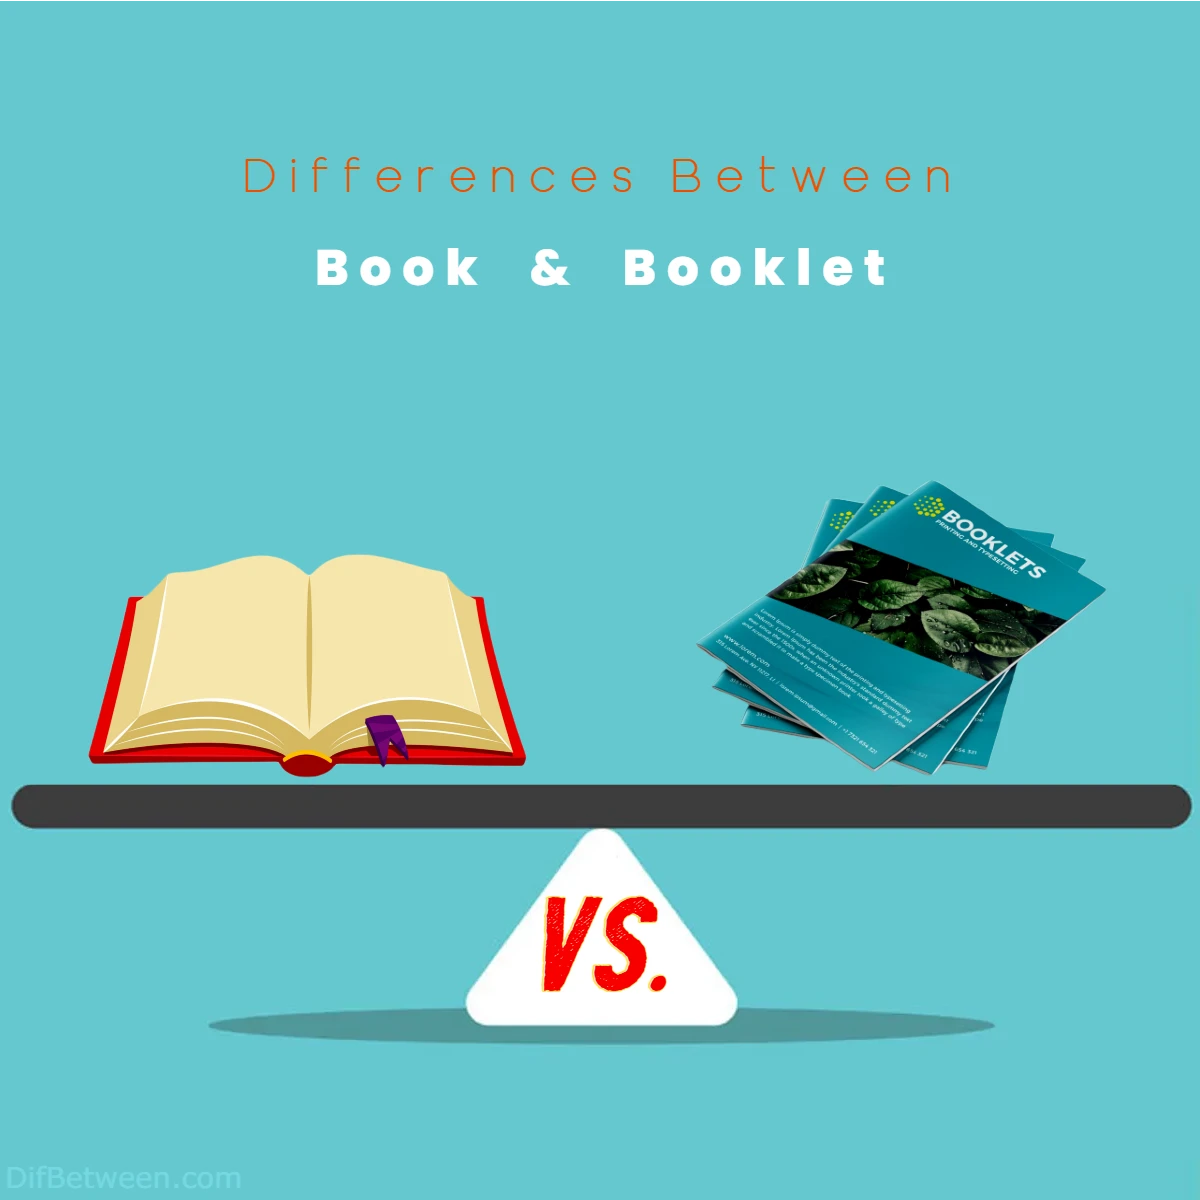 Differences Between Book vs Booklet